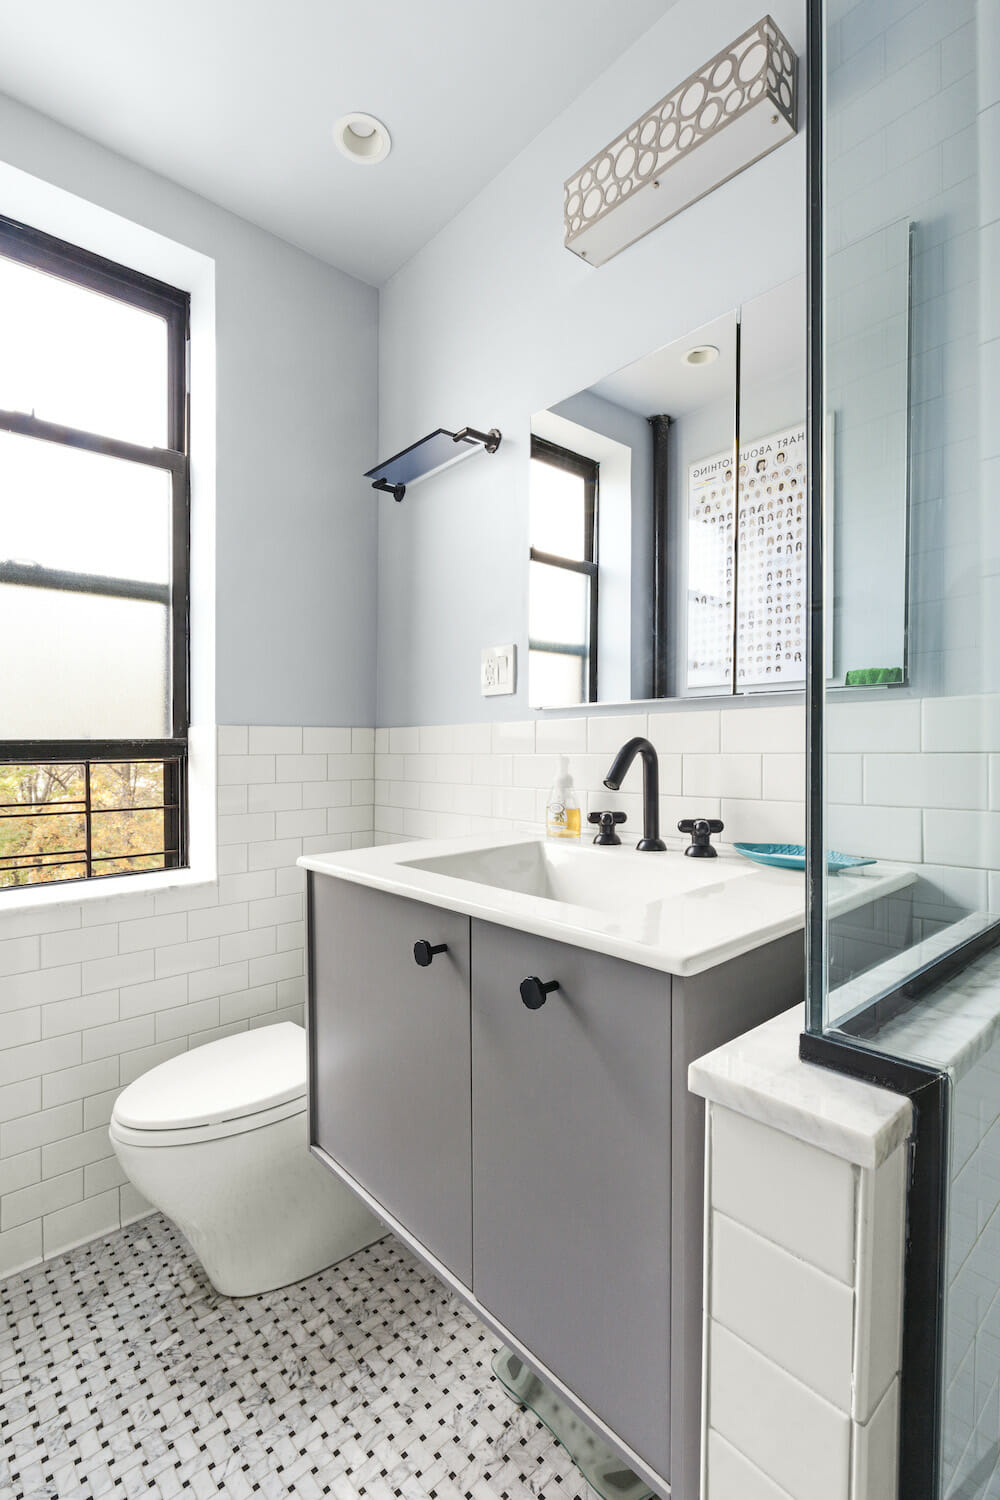 Bathroom Tiles And How Much They Cost, How Much Does Subway Tile Cost Per Square Foot